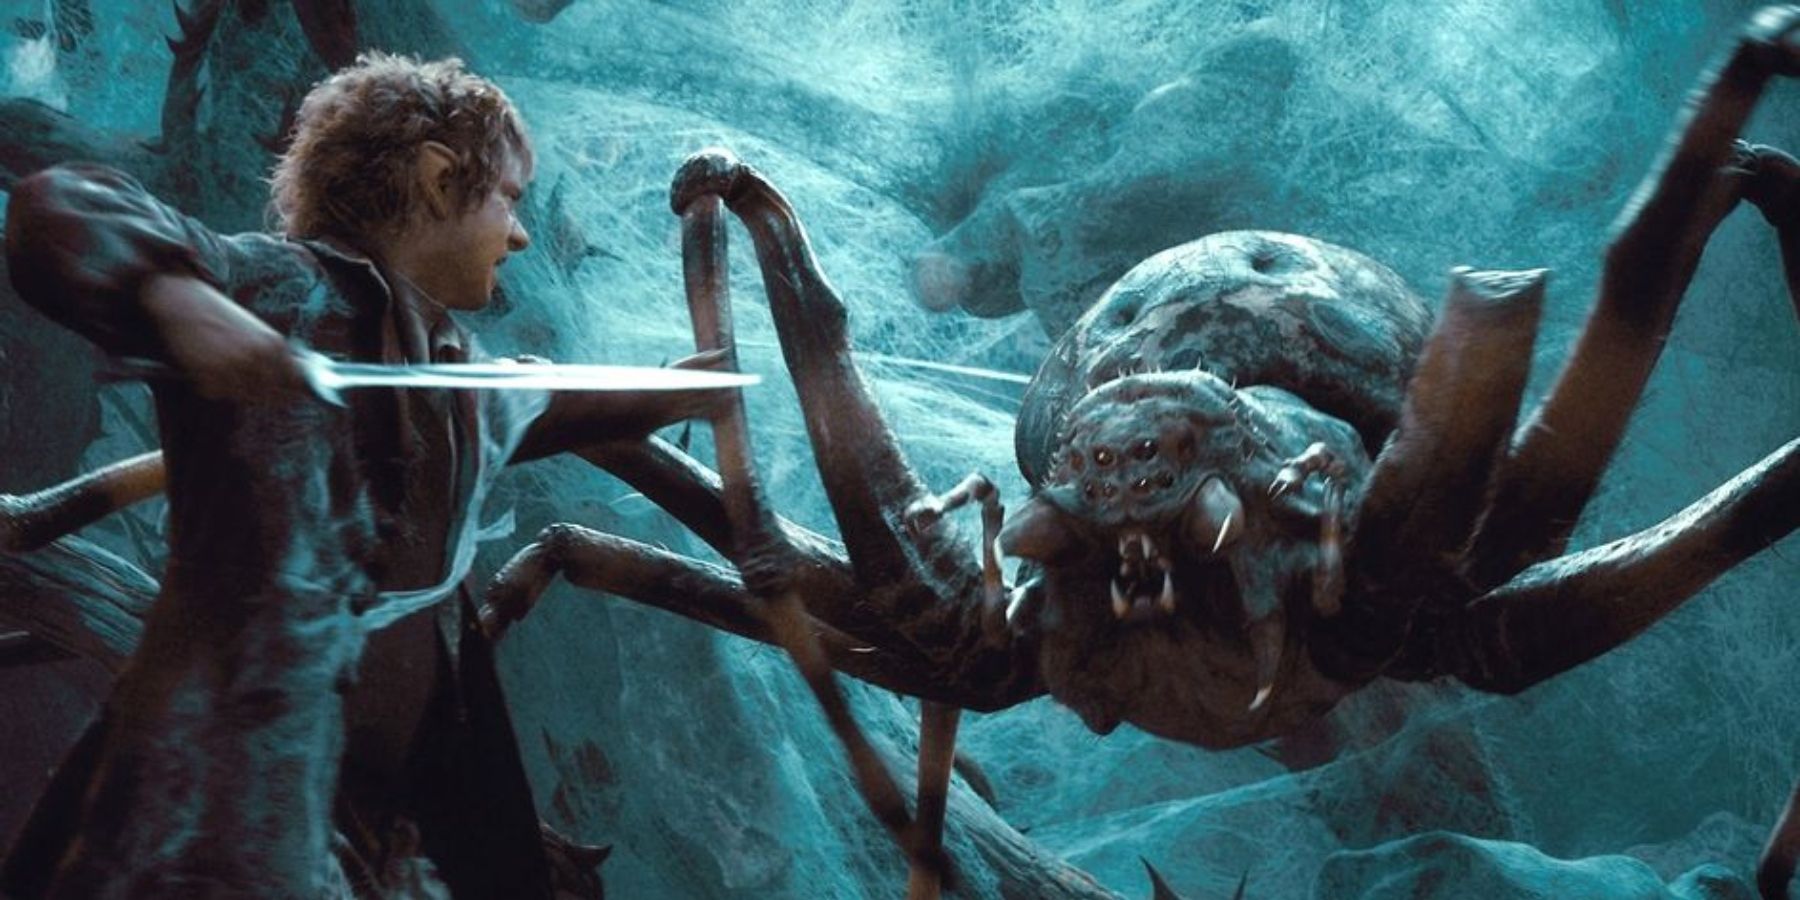 LOTR_Great Spider_Shelob